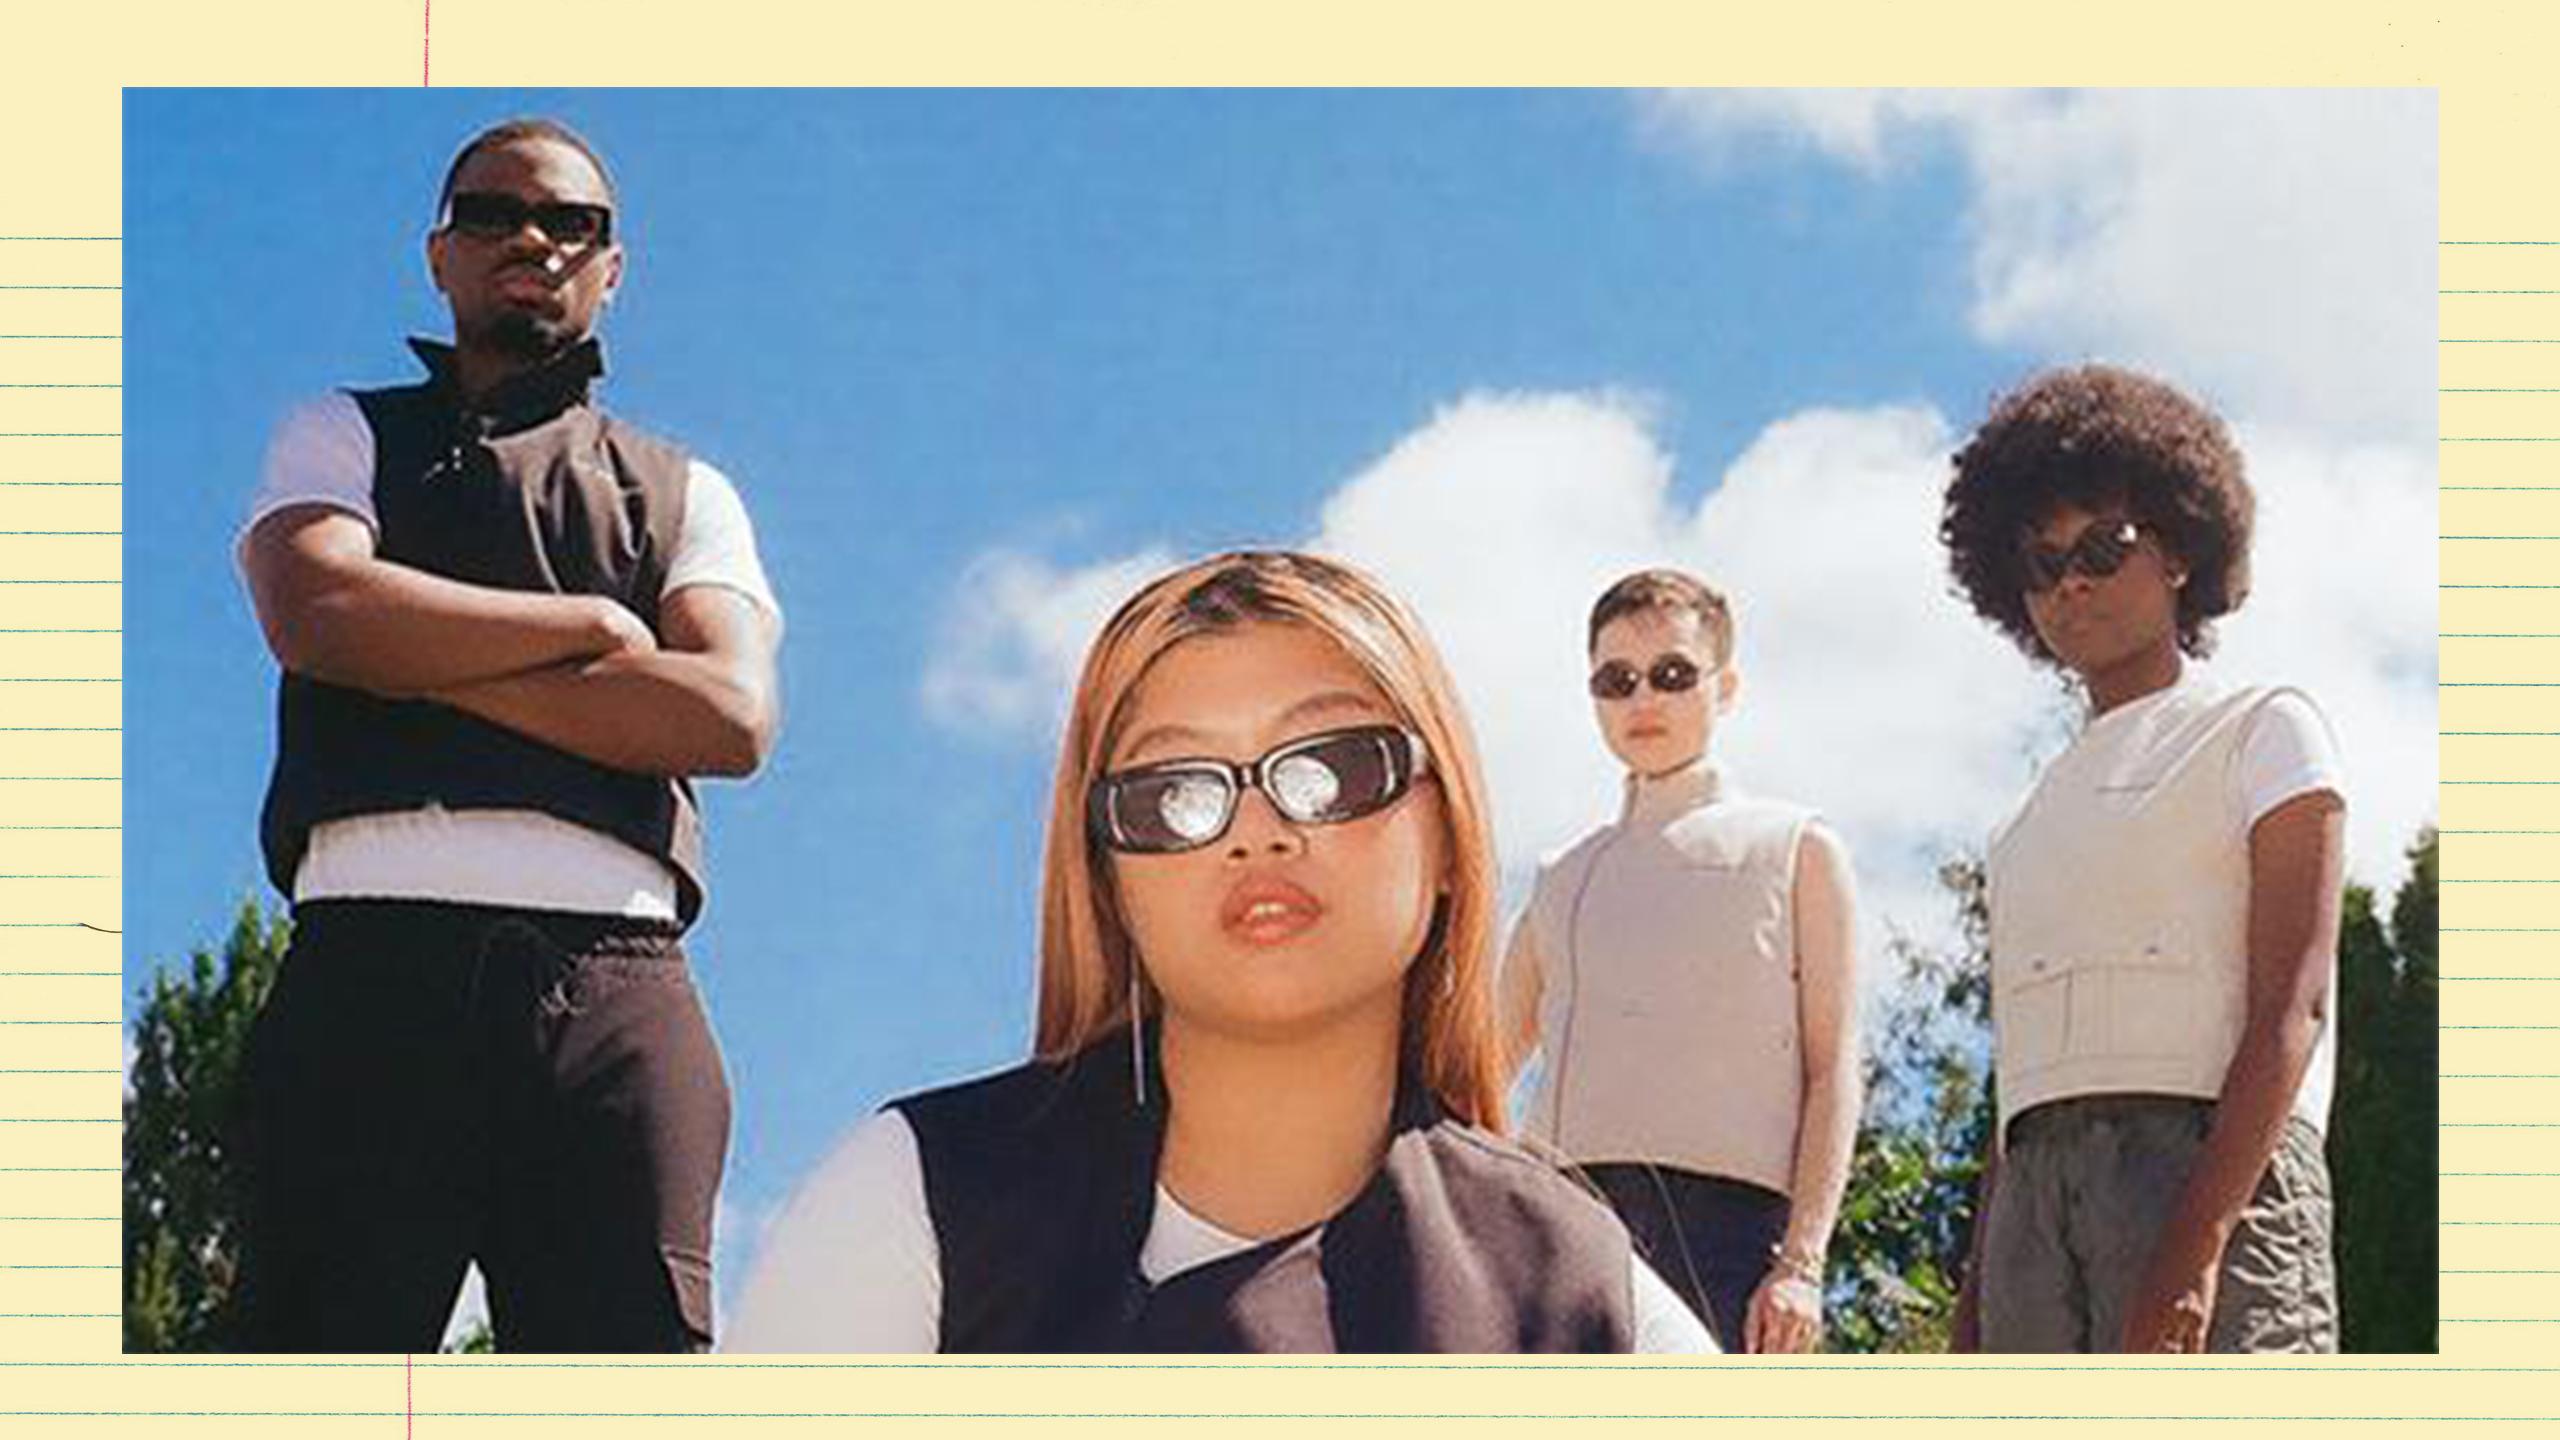 A group of people wearing sunglasses and black, white and cream athleisure, looking at the camera. They're standing outside with green trees and a blue, sunny sky behind them. The photo is taken from a low angle.